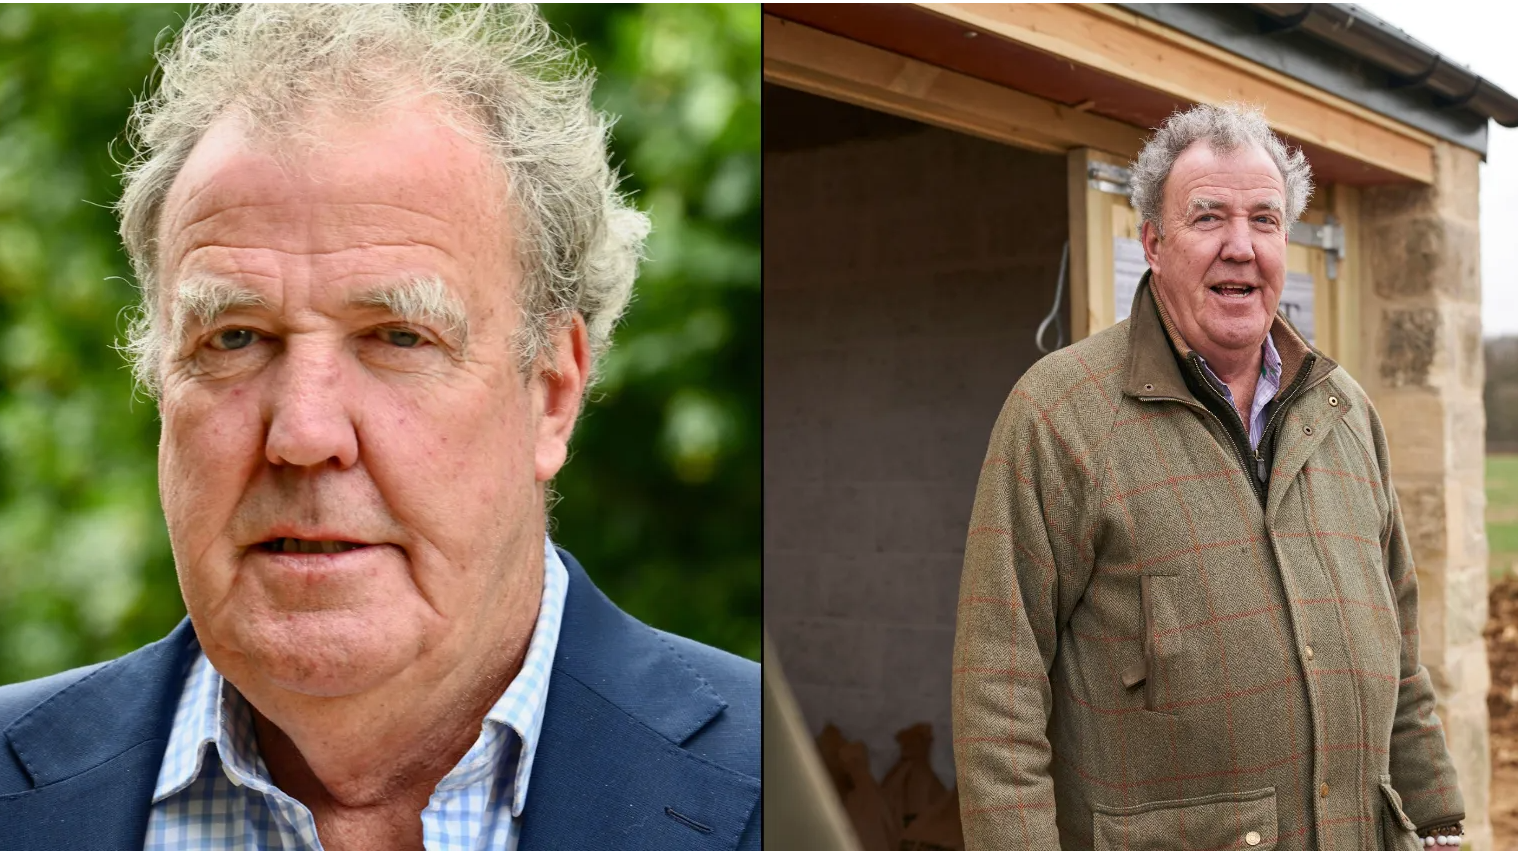 to drop The Grand Tour after Jeremy Clarkson controversy